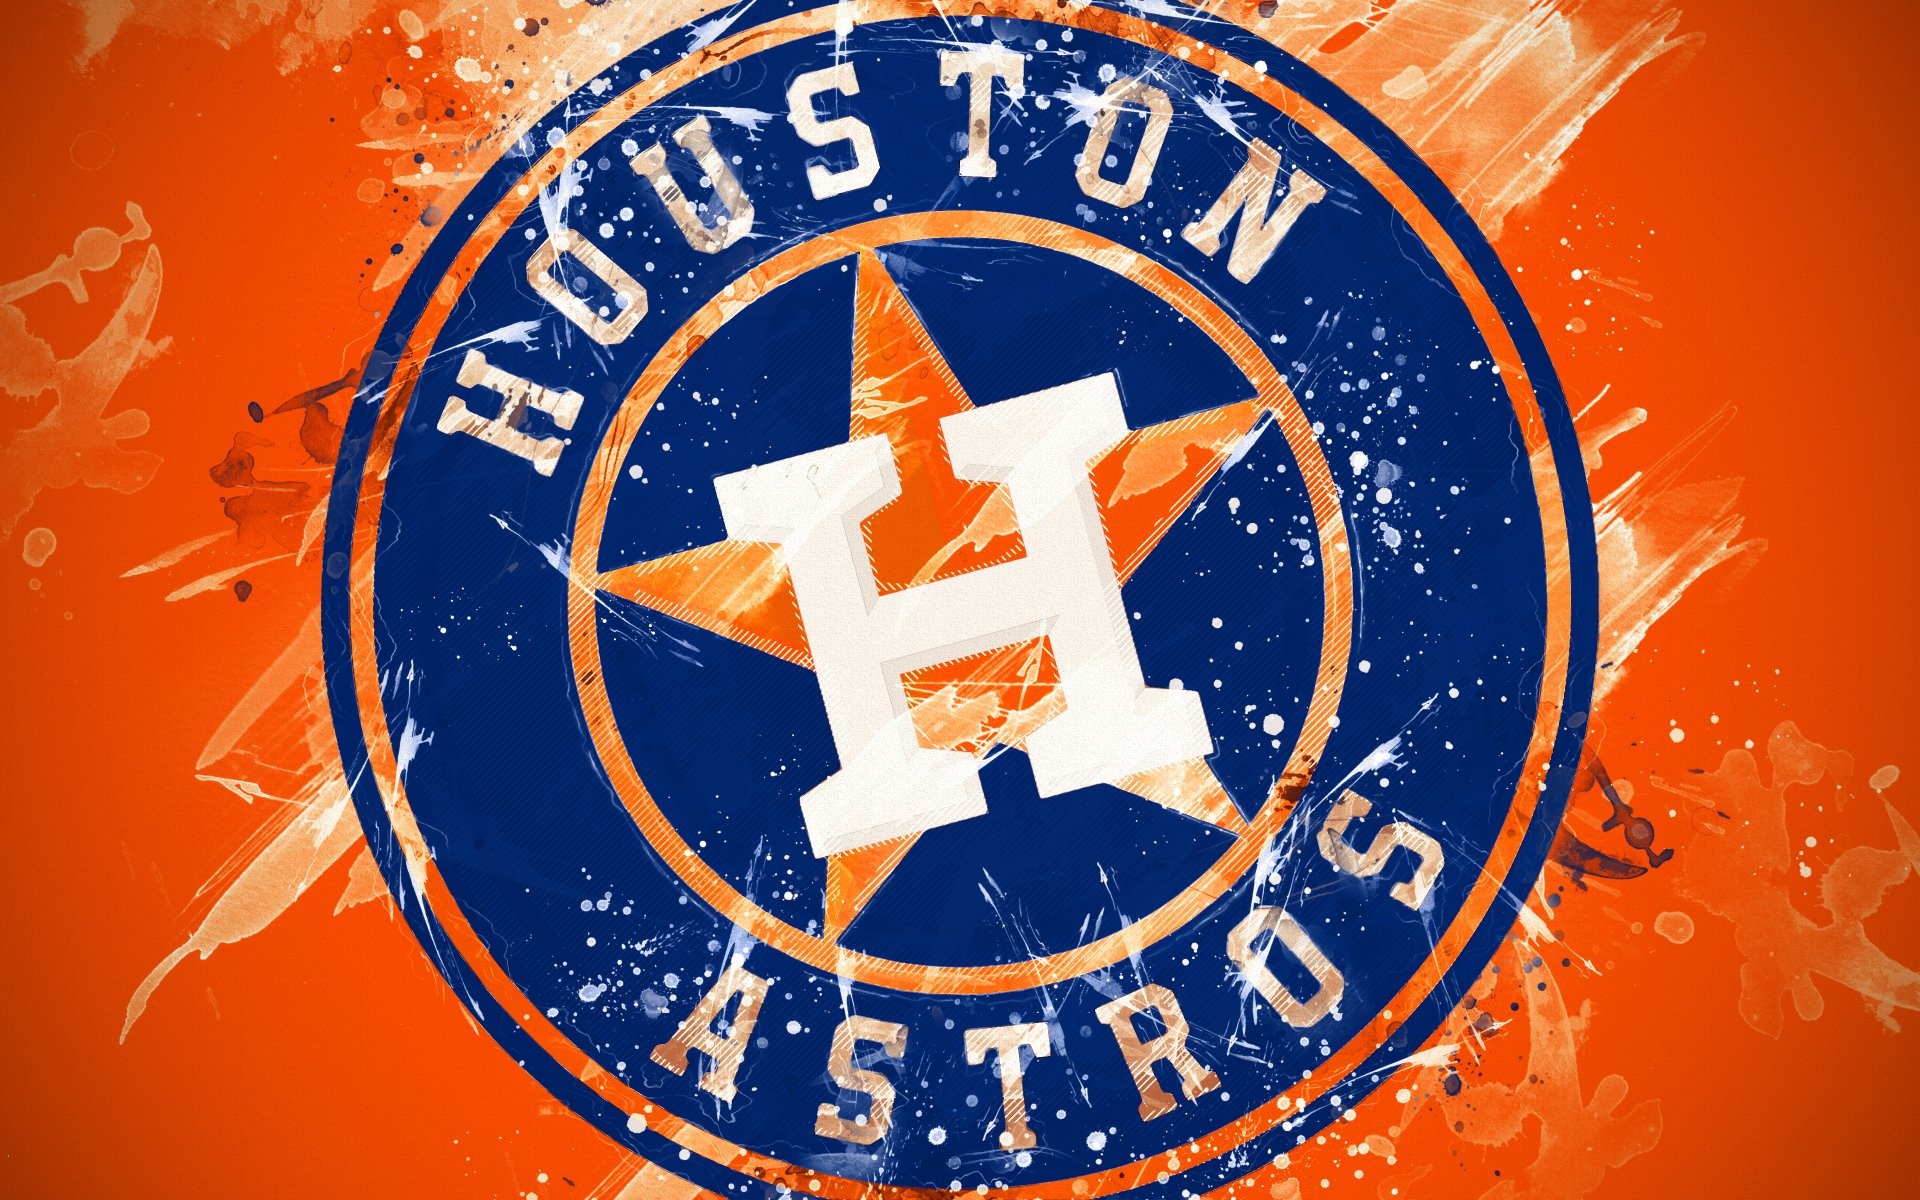 Houston Astros, HD wallpapers, Background images, Sports team, 1920x1200 HD Desktop